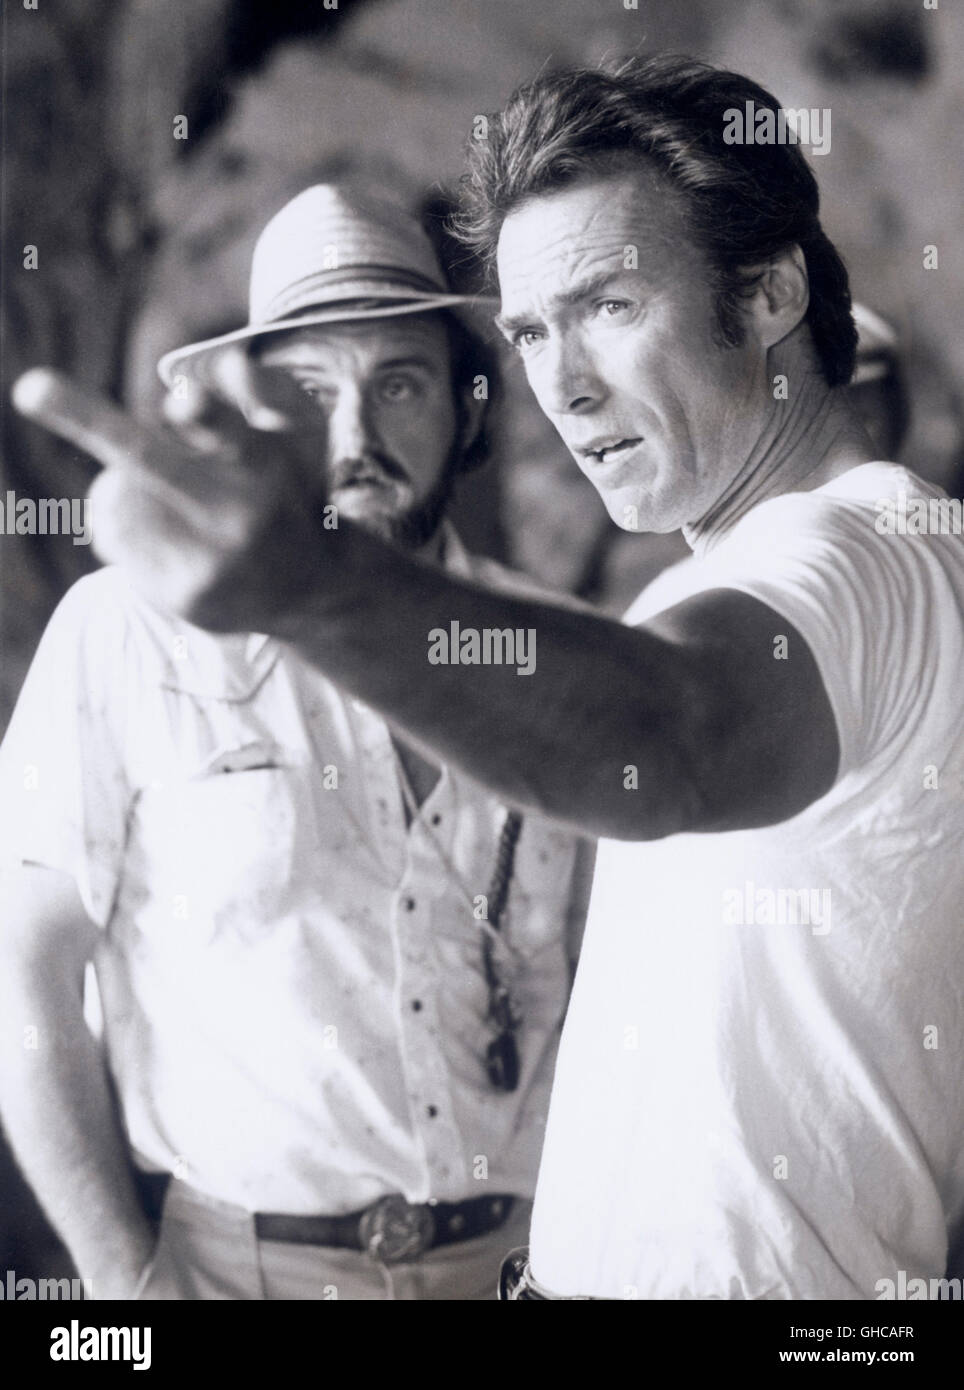 THE GAUNTLET USA 1977 Clint Eastwood Director CLINT EASTWOOD on the Set. Regie: Clint Eastwood Stock Photo